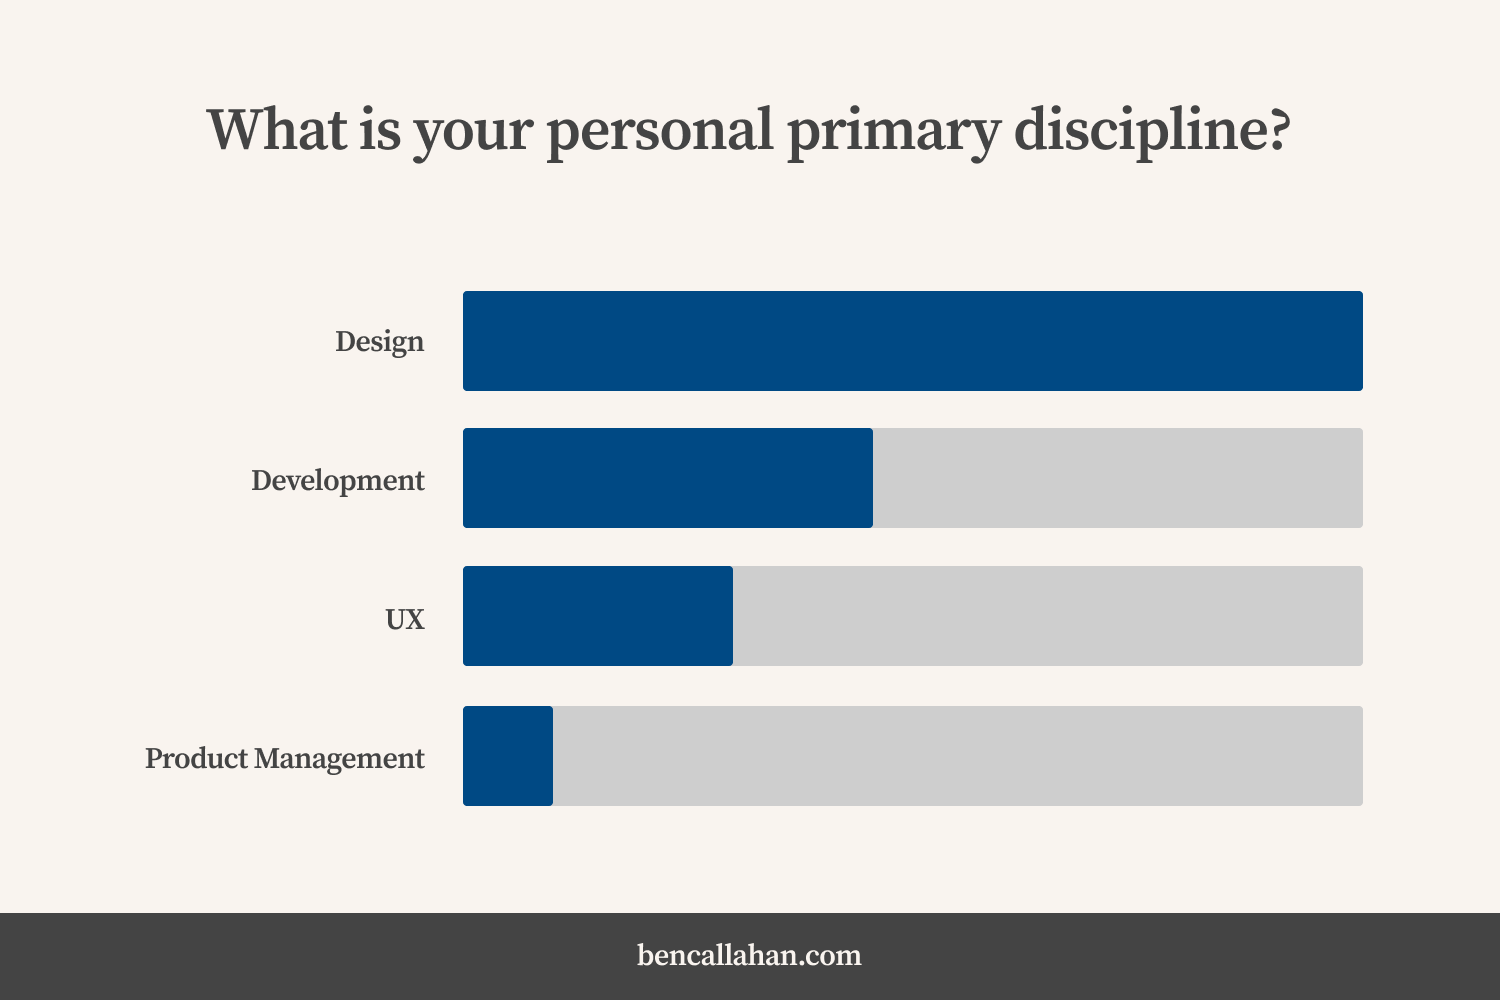 In response to the question, “What is your personal primary discipline?”: I saw a large majority of respondents reporting design or development.